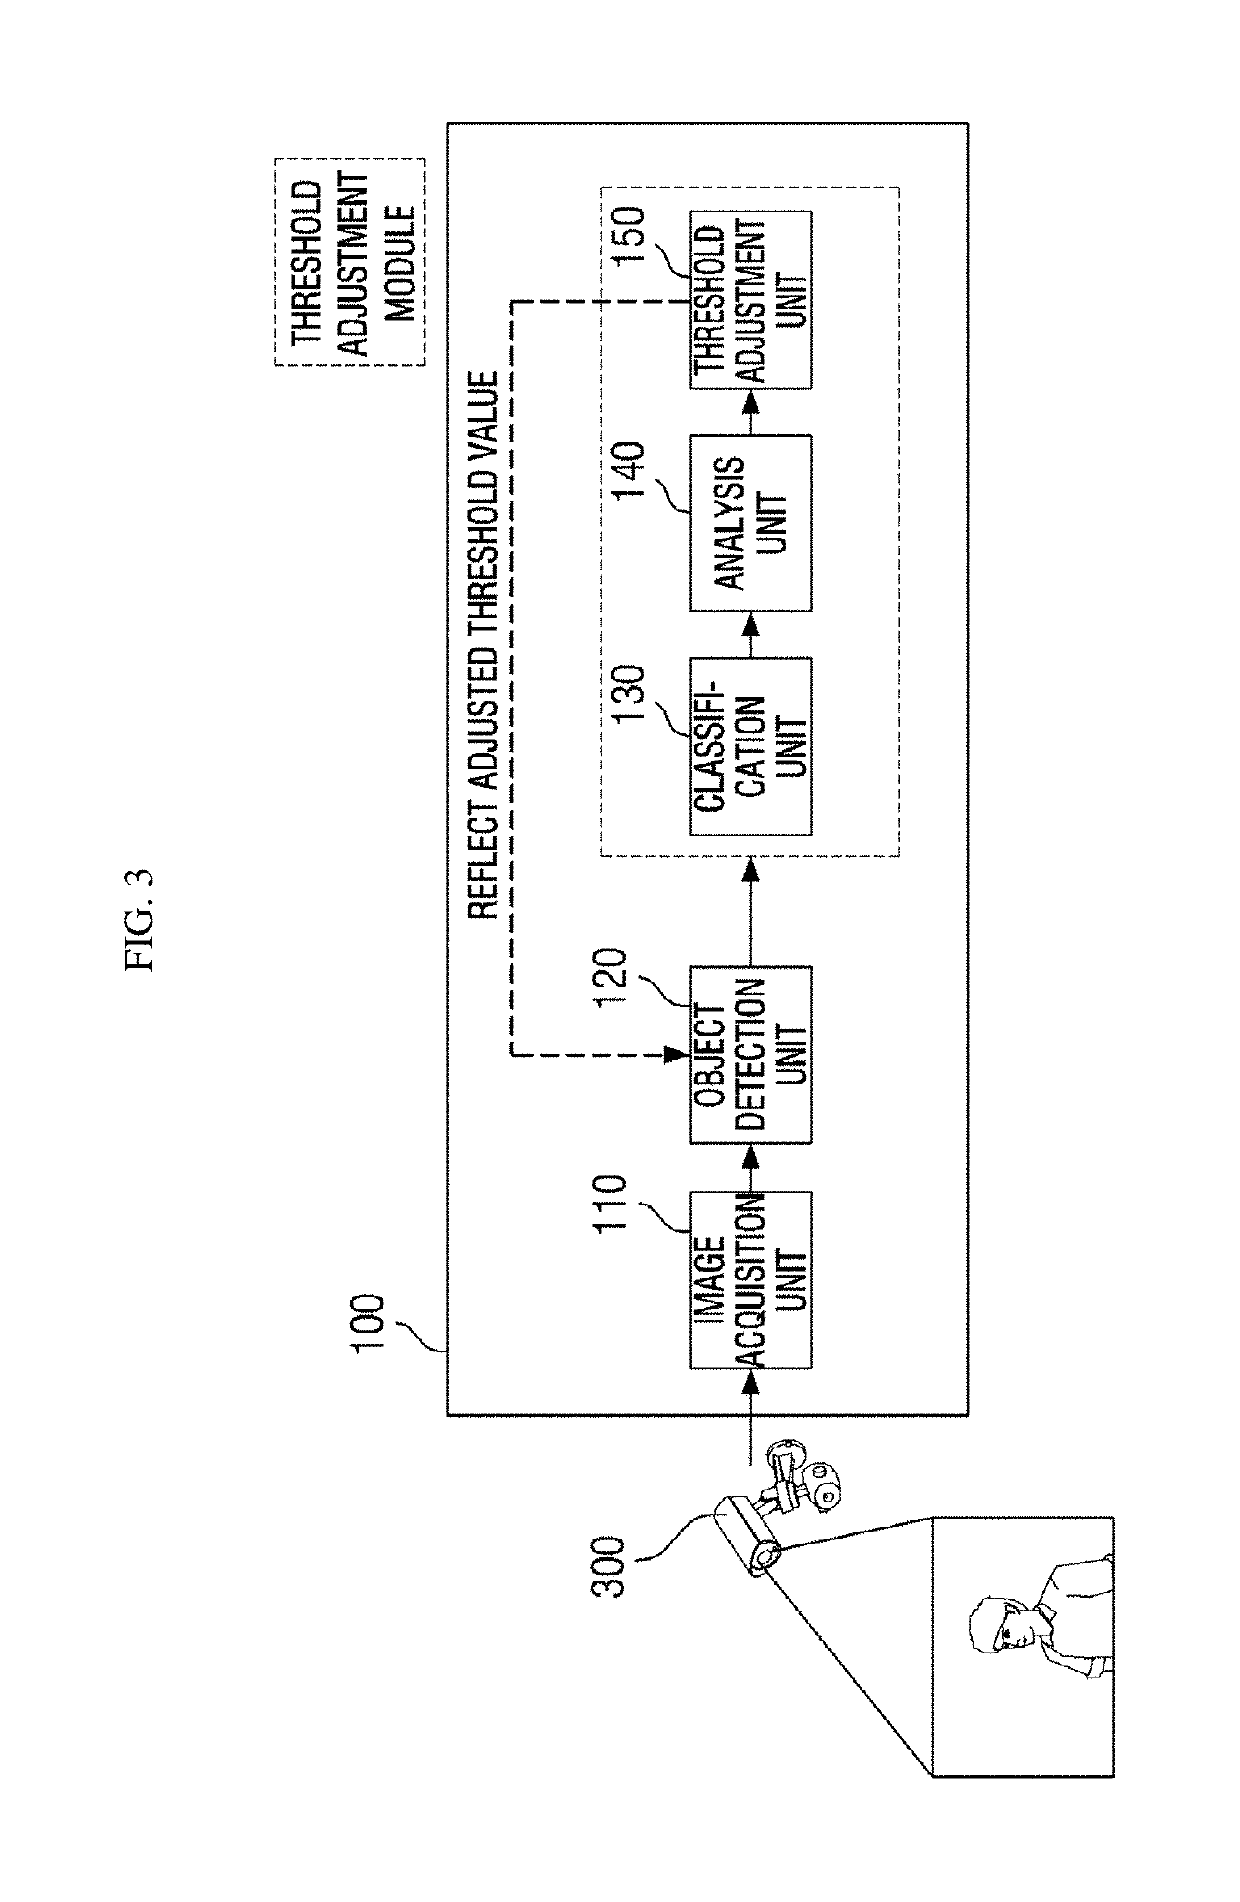 Machine learning-based object detection method and apparatus